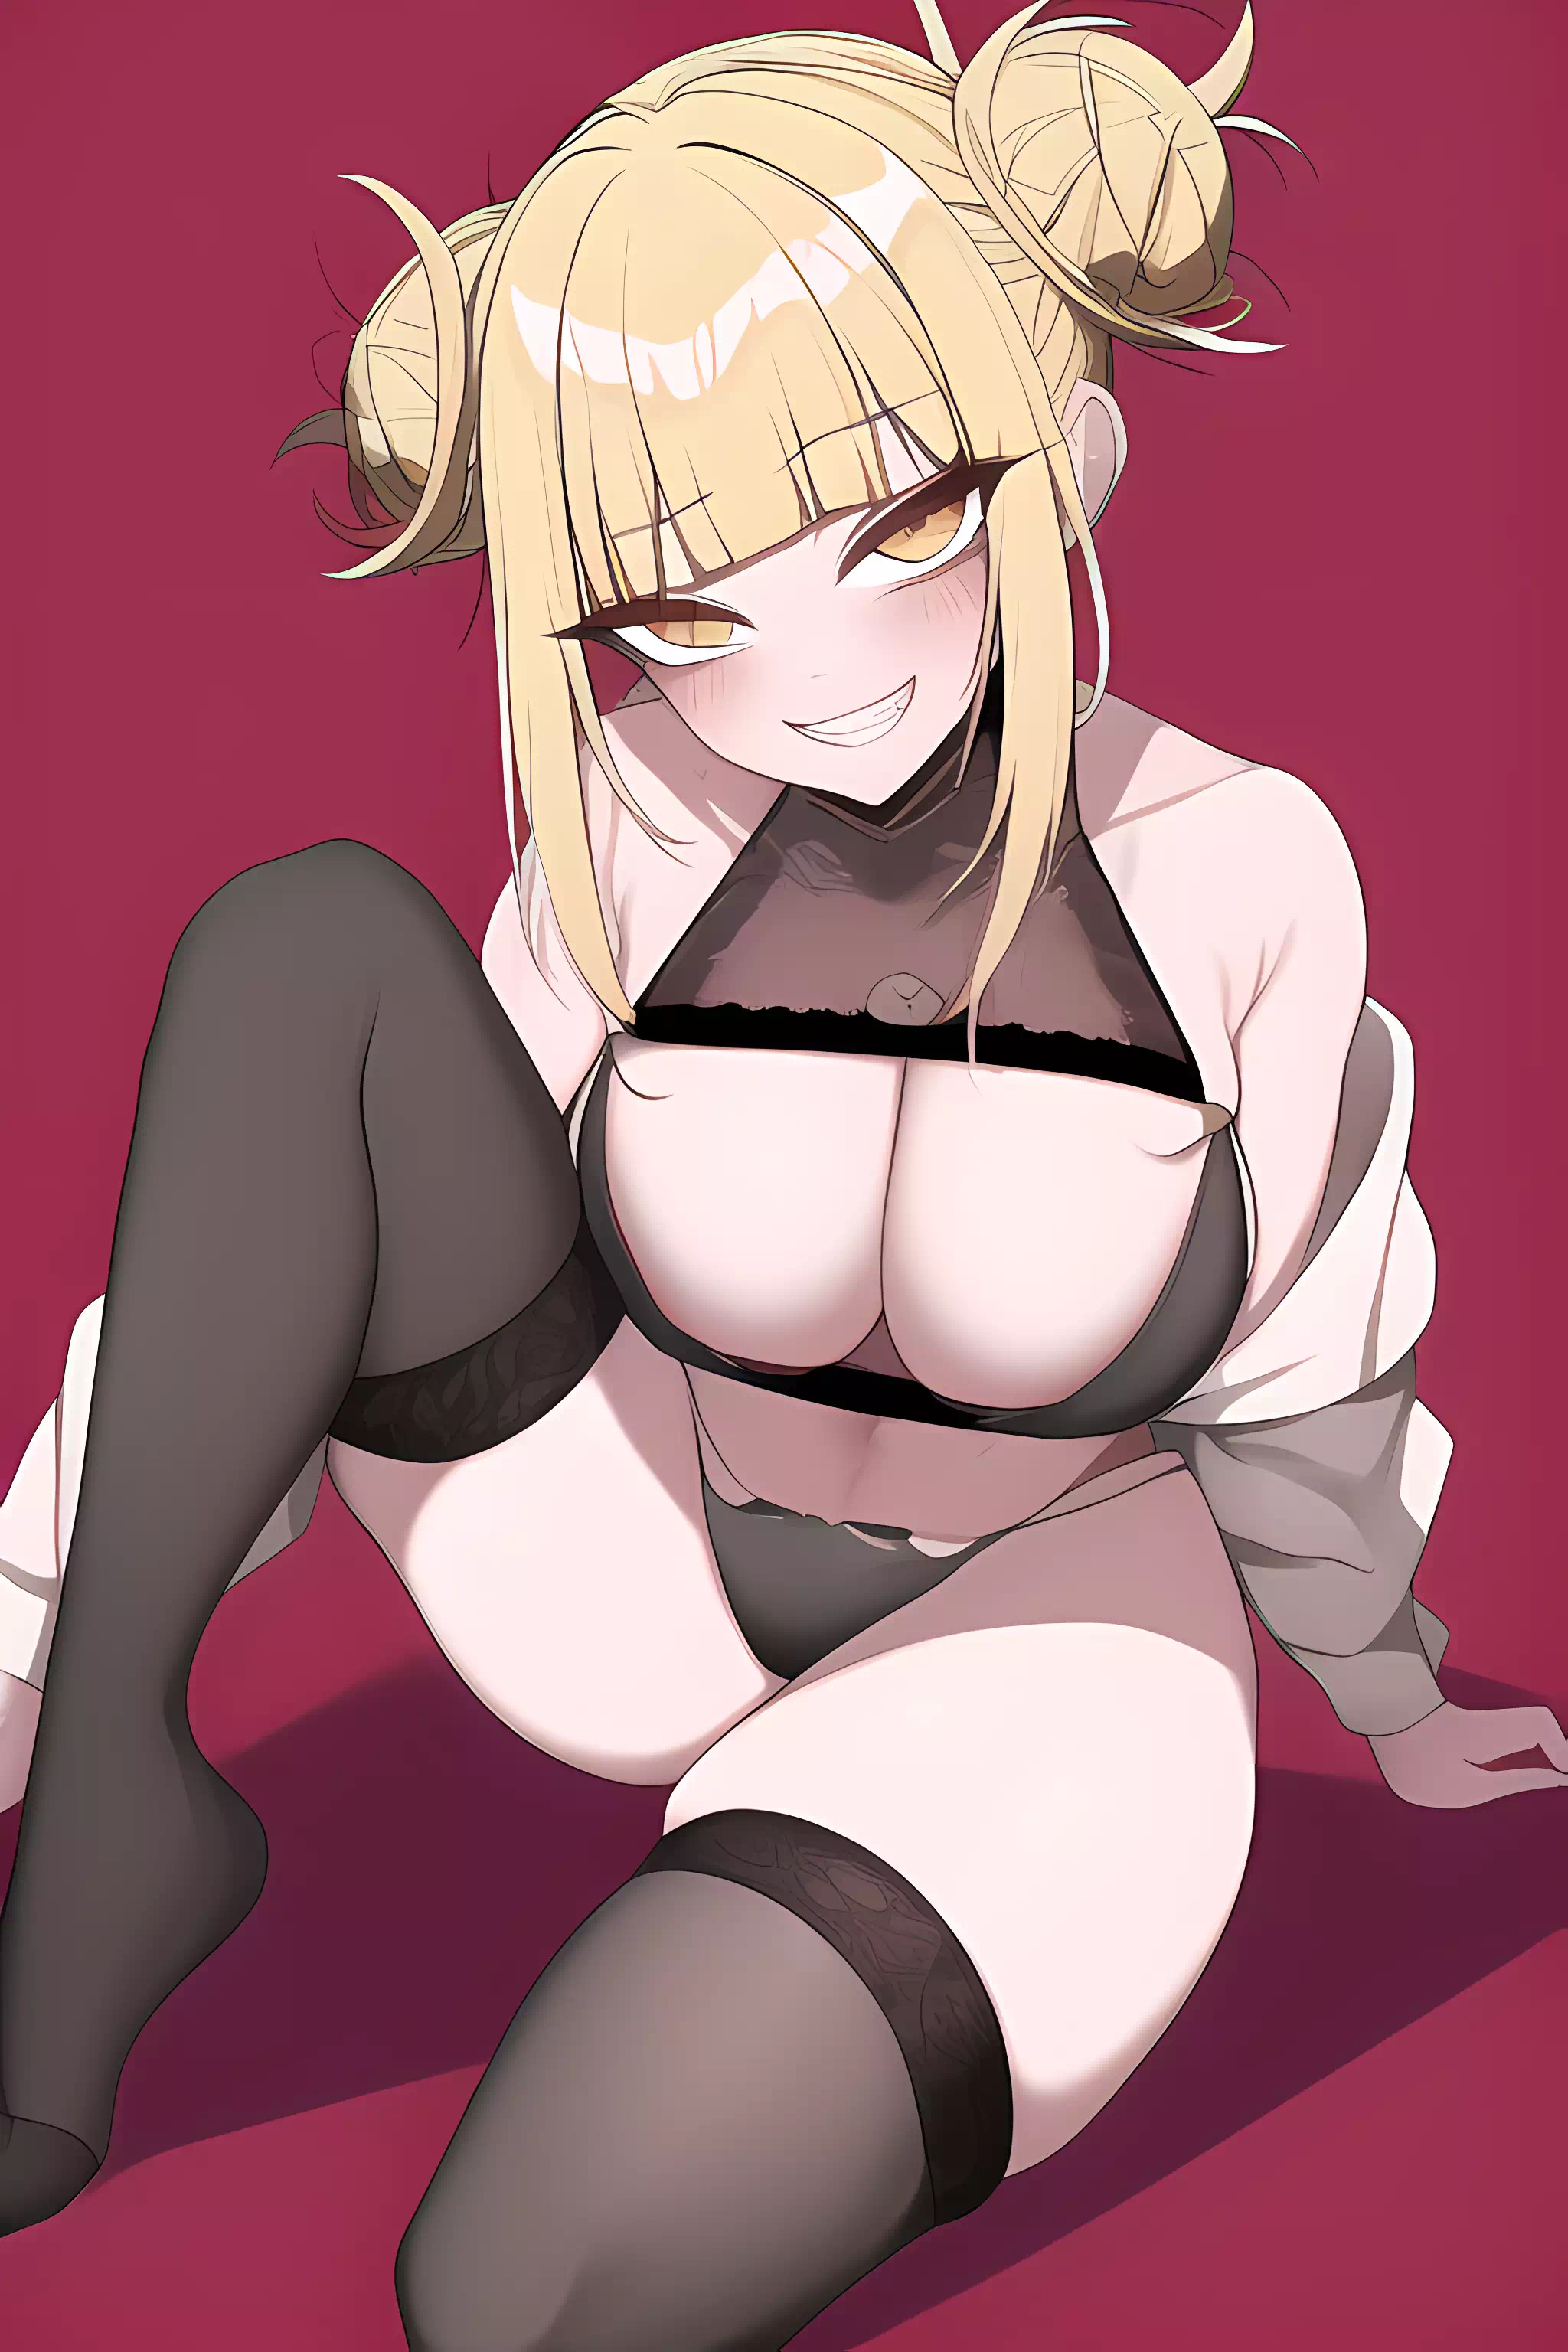 Toga new outfit